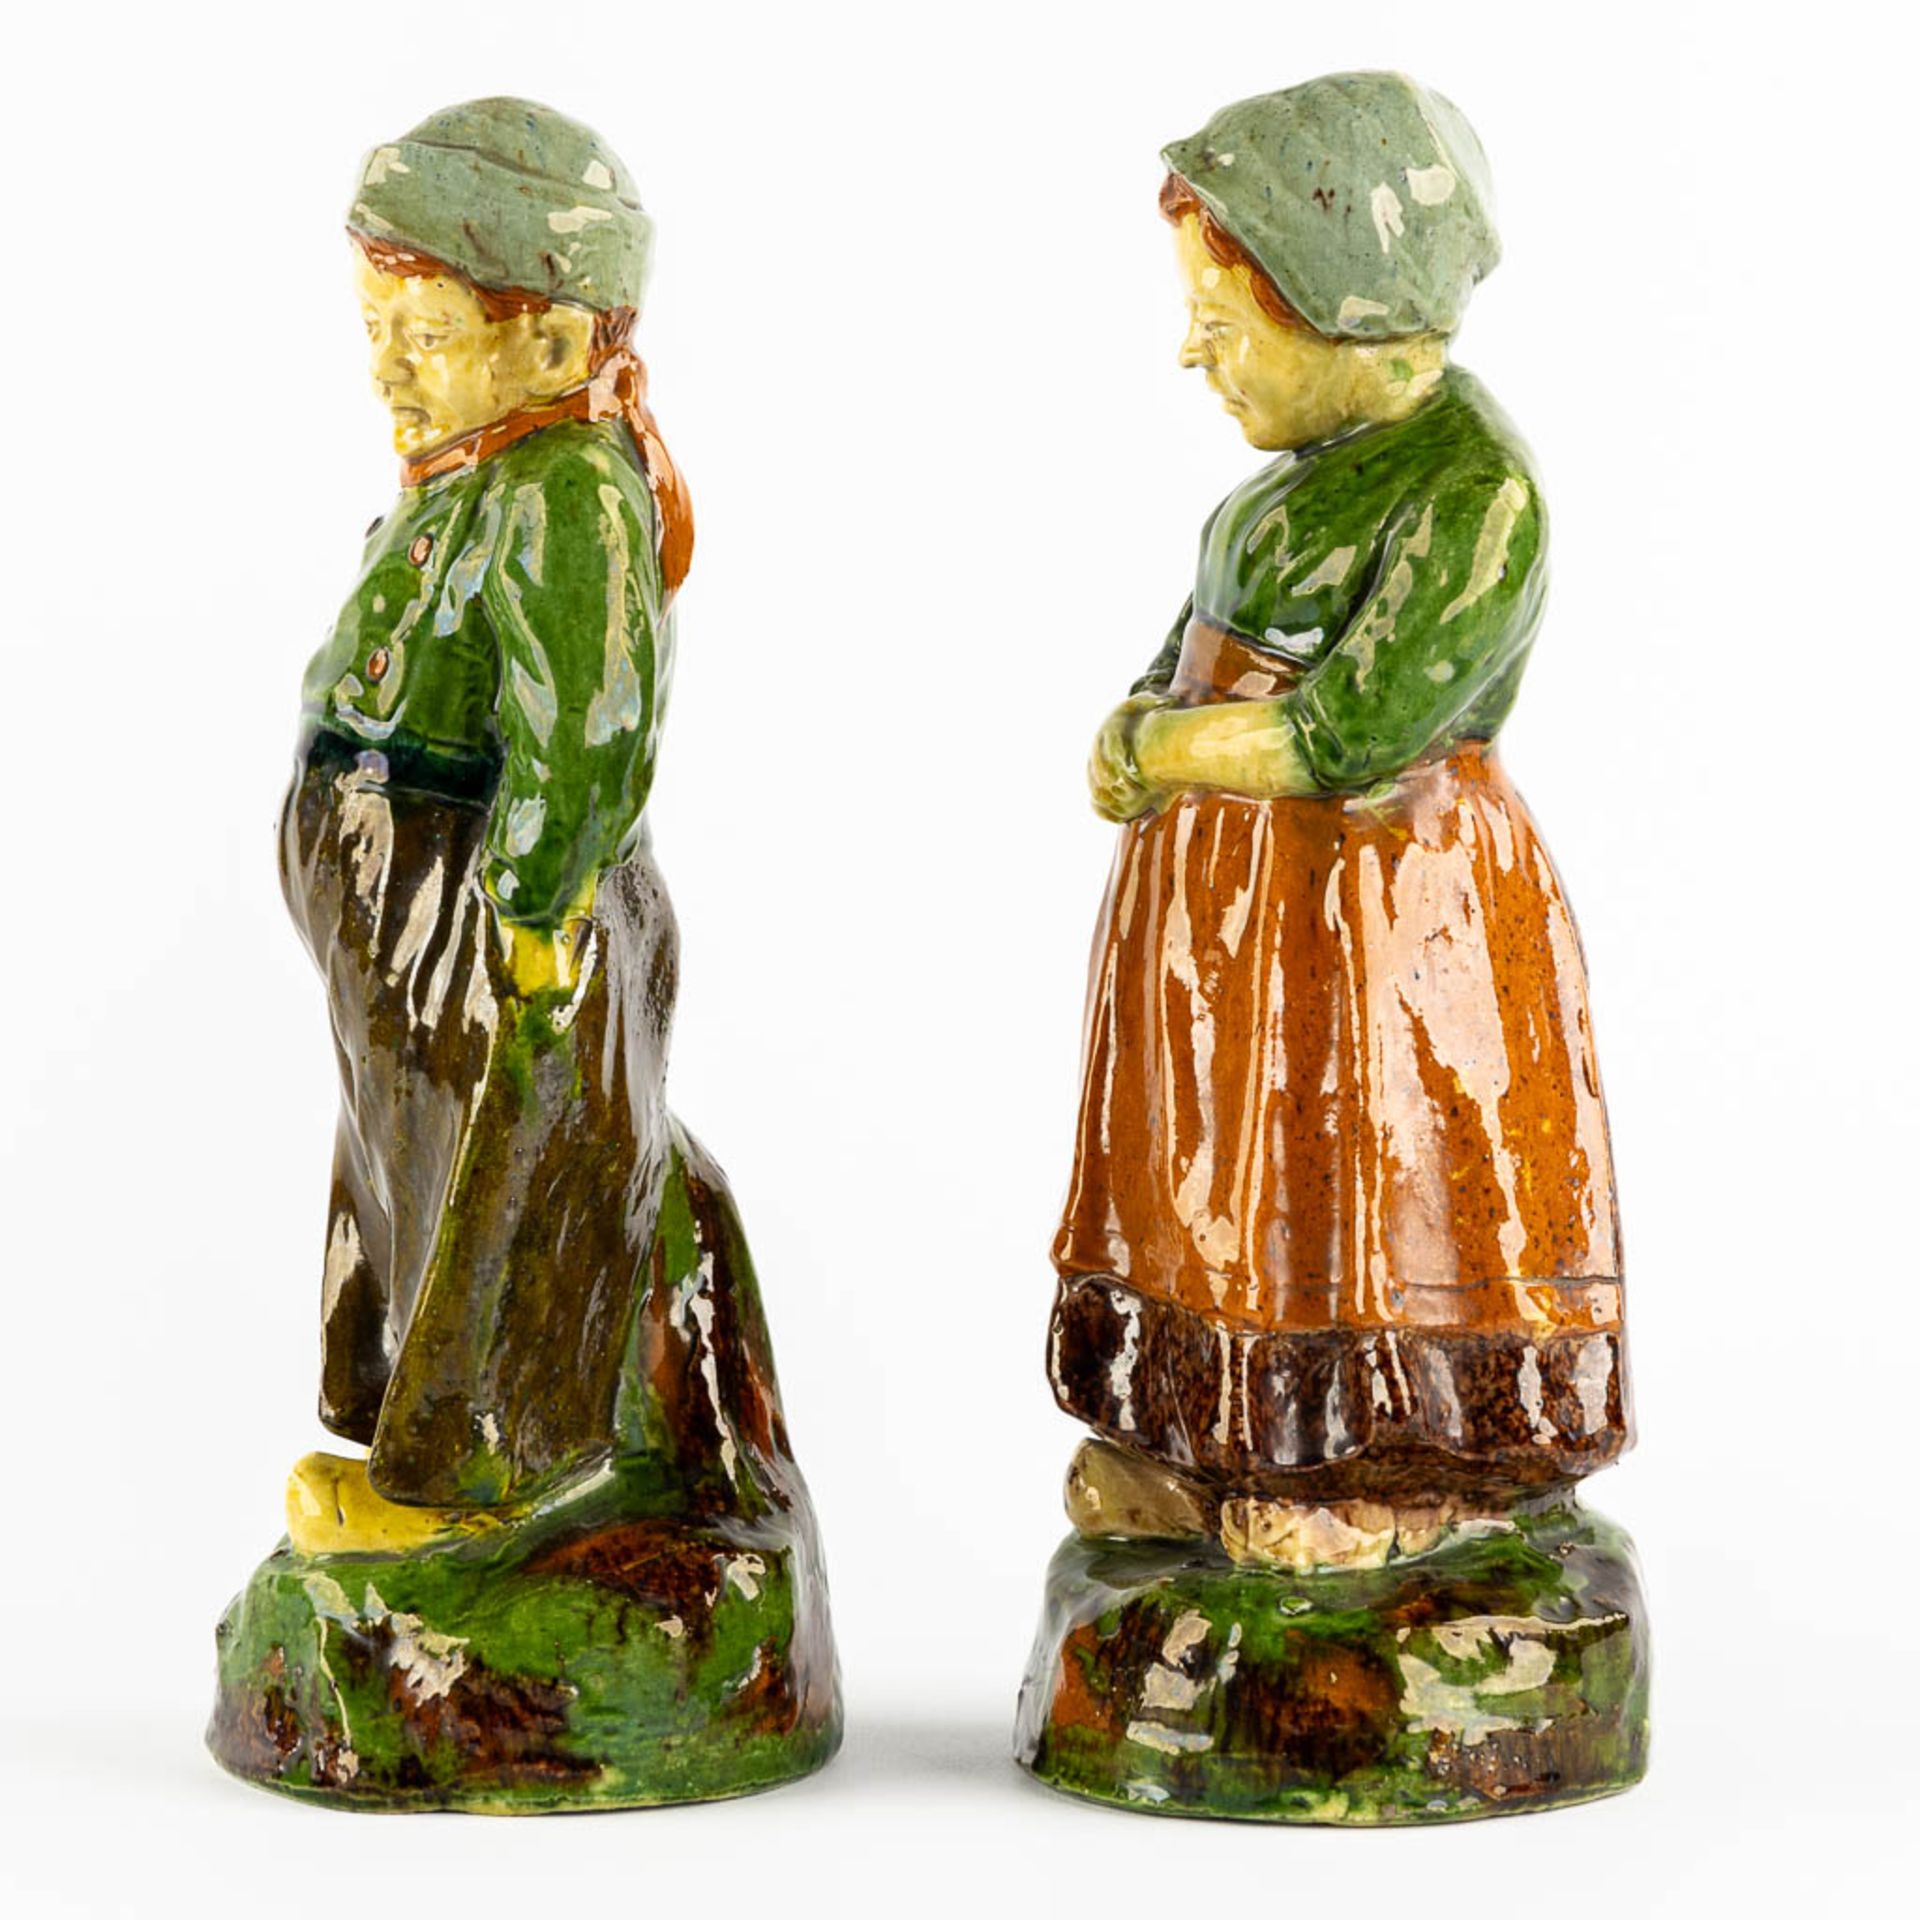 Figurine of a Man and Woman, Flemish Earthenware, possibly Caessens. Circa 1900. (H:32 x D:12 cm) - Image 6 of 9